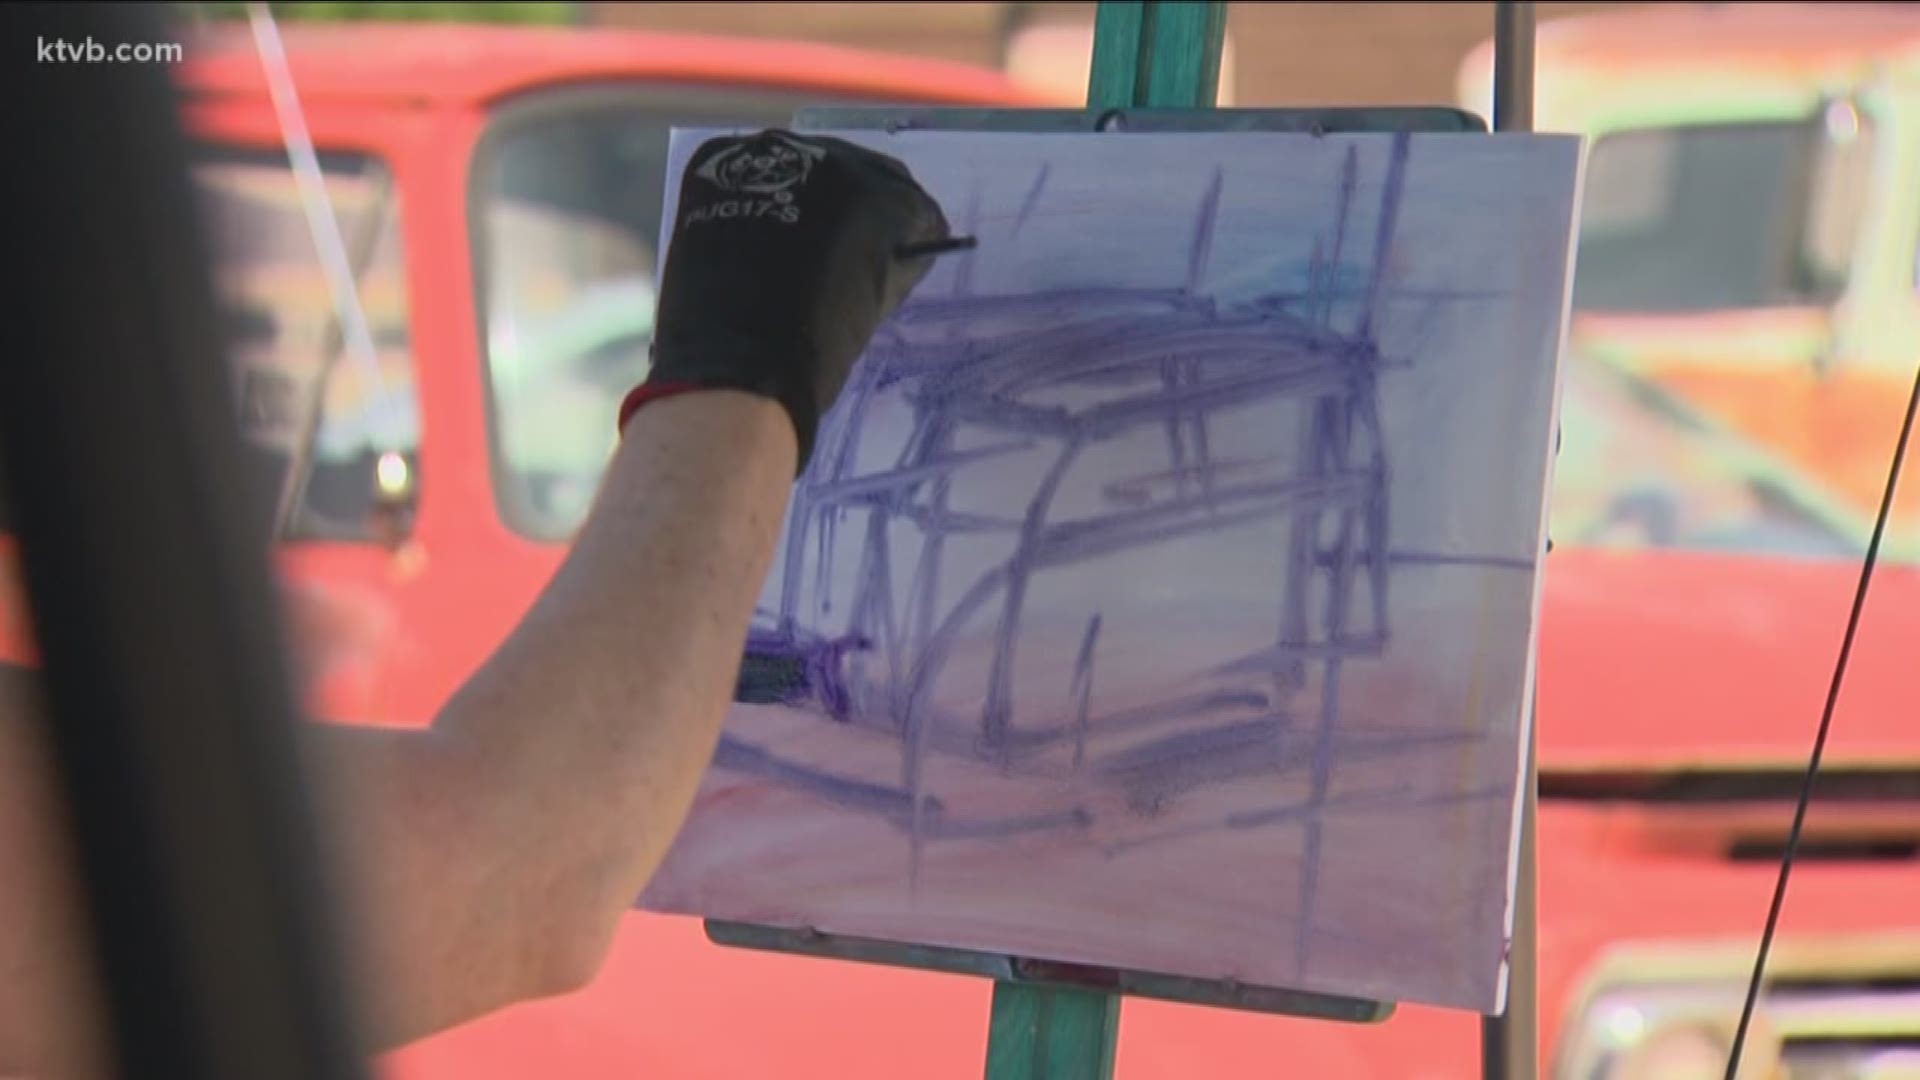 The weather warming up means more people are heading outside to enjoy it. But outdoor adventurers aren't the only ones who like to take advantage of days like these. So do plein air painters.